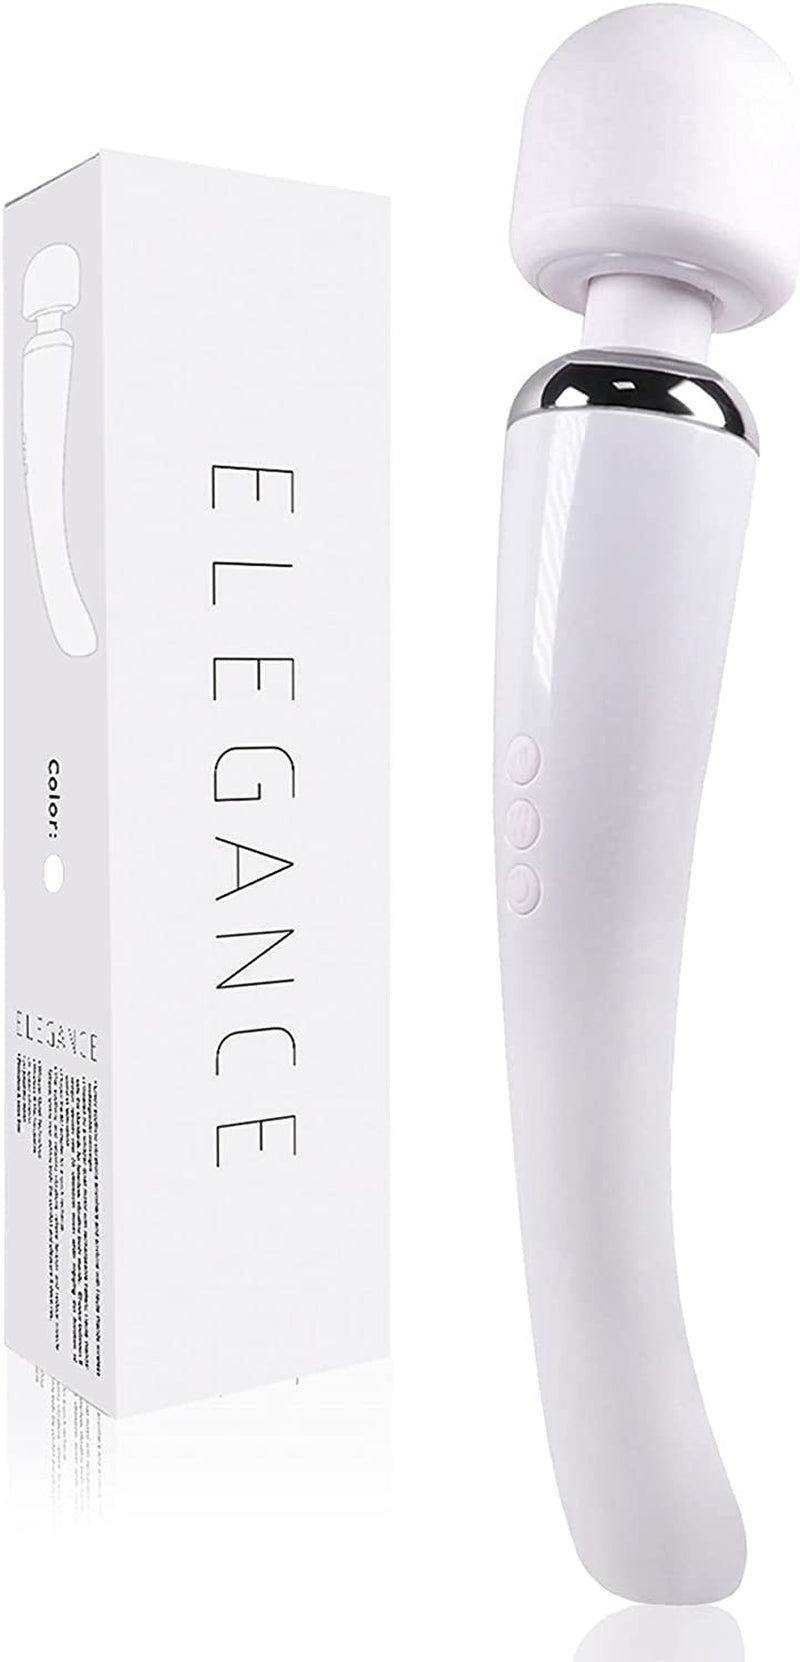 keenigh Wand Massager Therapeutic Personal Massager with 8 Speeds 20 Vibrating Patterns USB Rechargeable Handheld Cordless Wand Massager for Muscle Aches and Sports Recovery - White